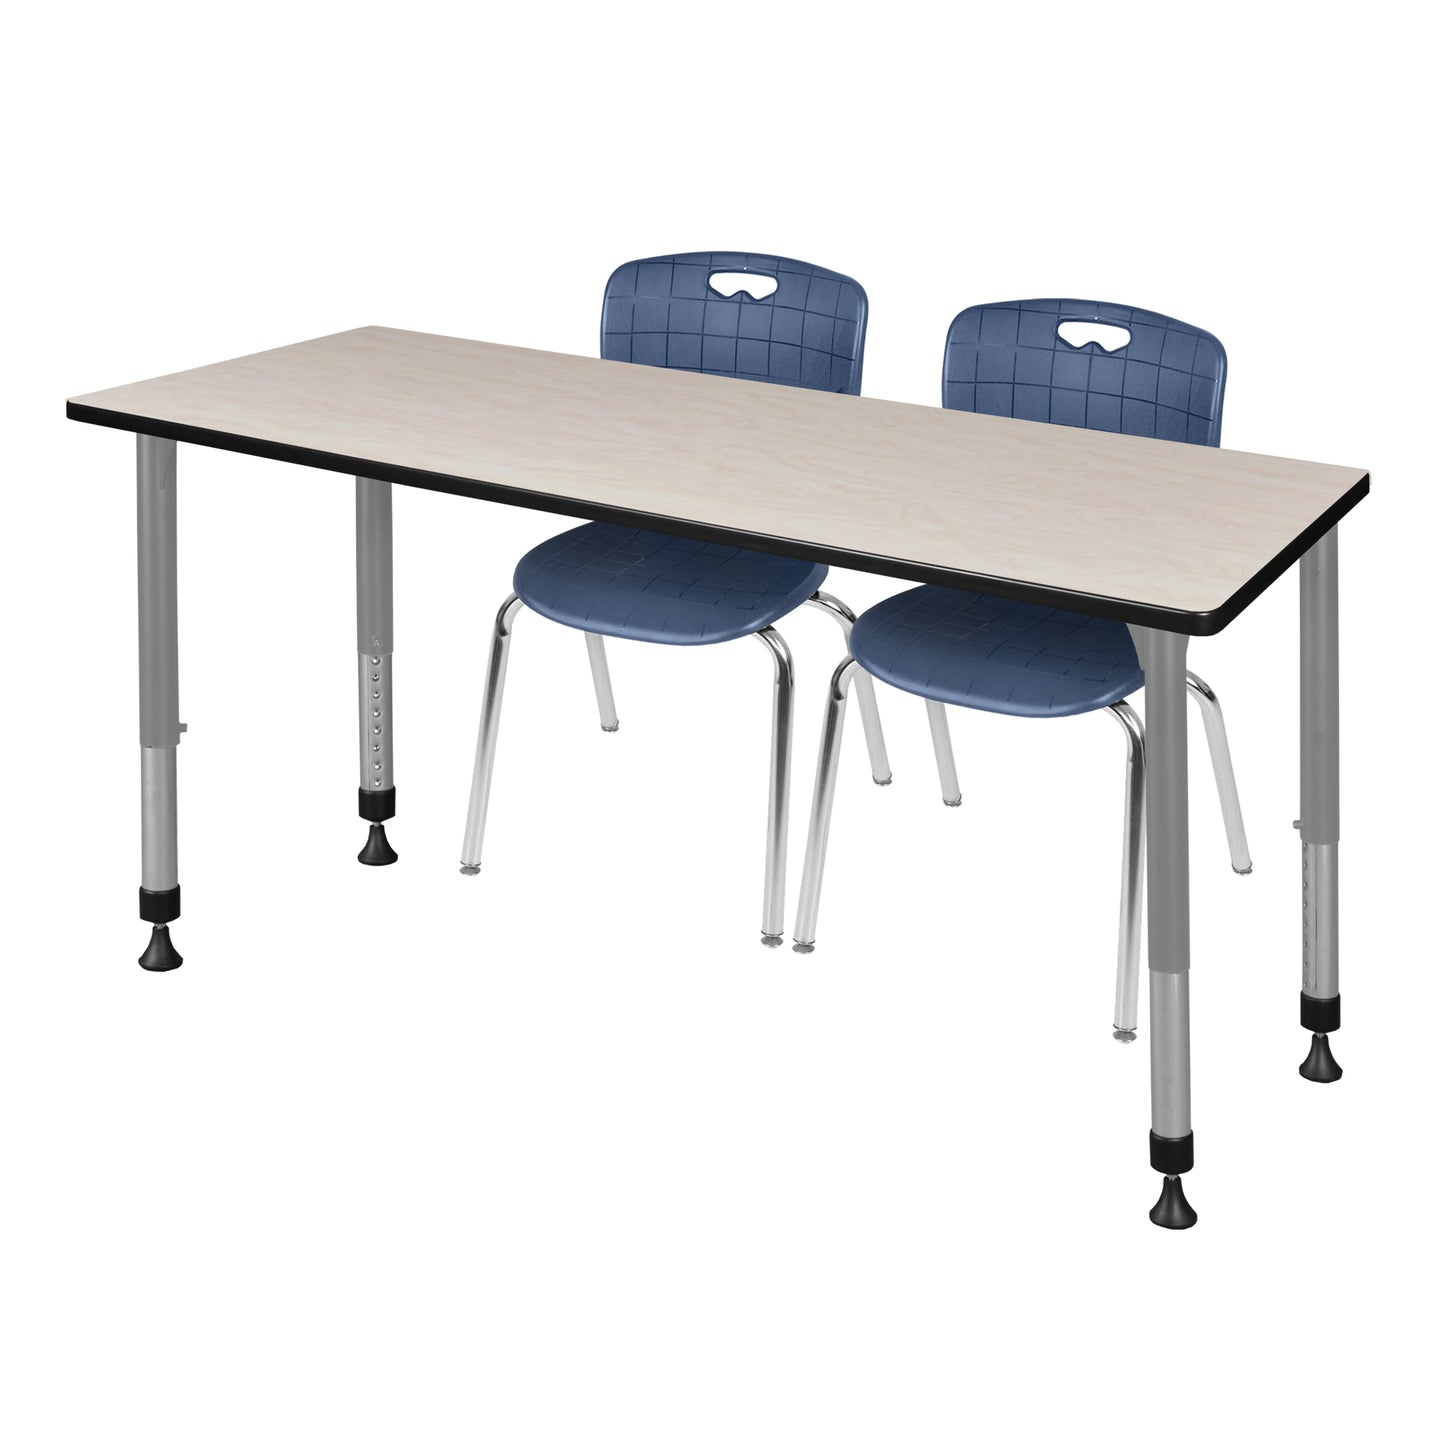 Regency Kee 66 x 24 in. Adjustable Classroom Table & 2 Andy 18 in. Stack Chairs